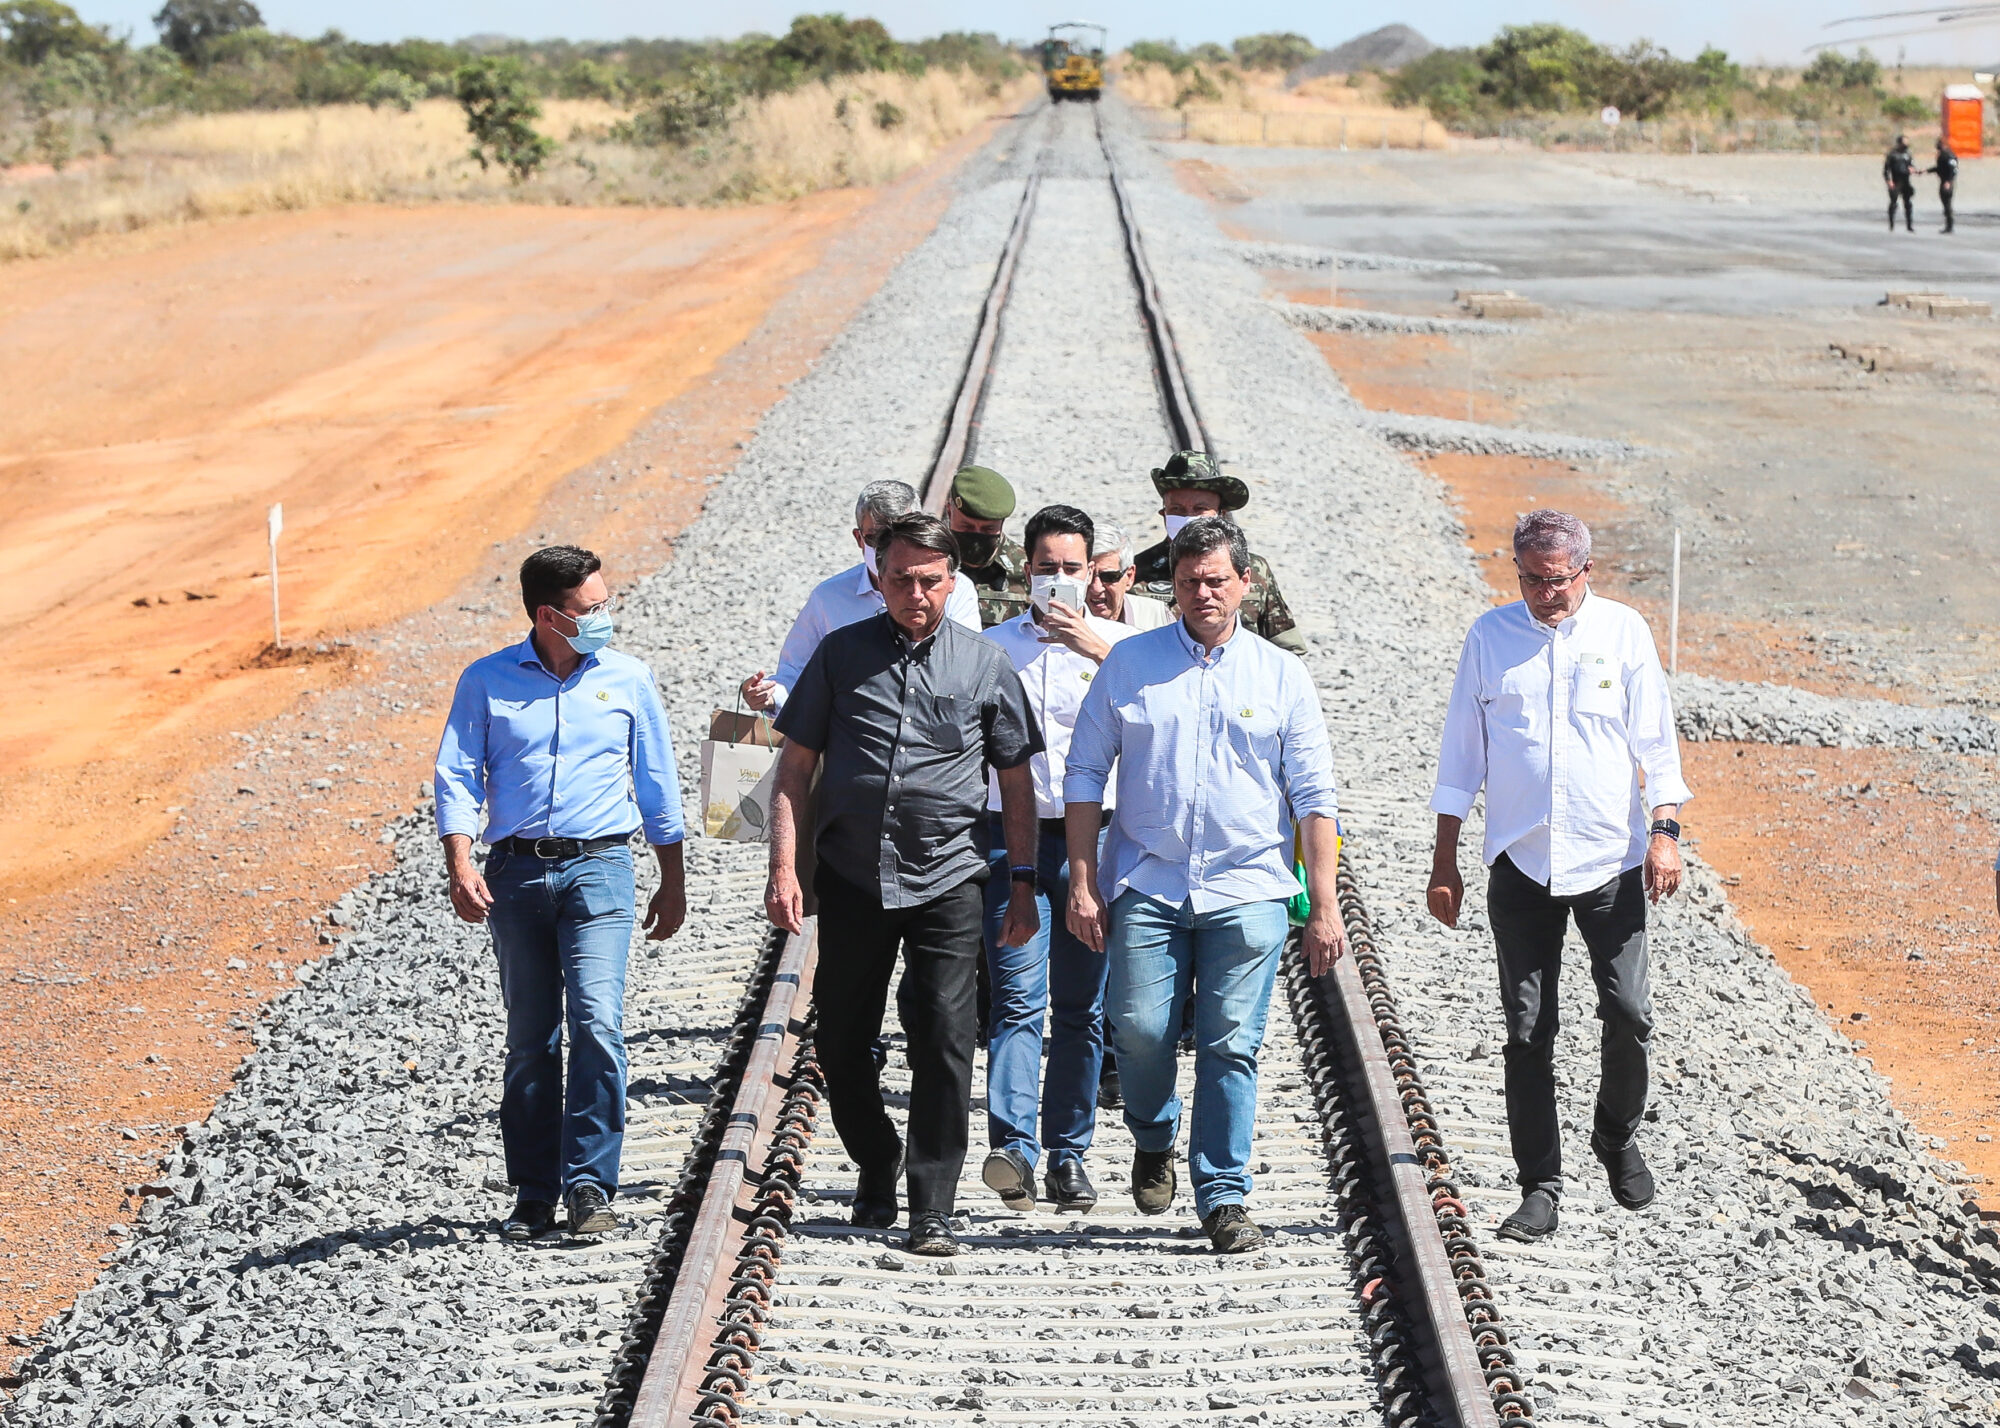 Brazil's President Bolsonaro walks along the tracks of the West-East Integration Railway (FIOL) together with